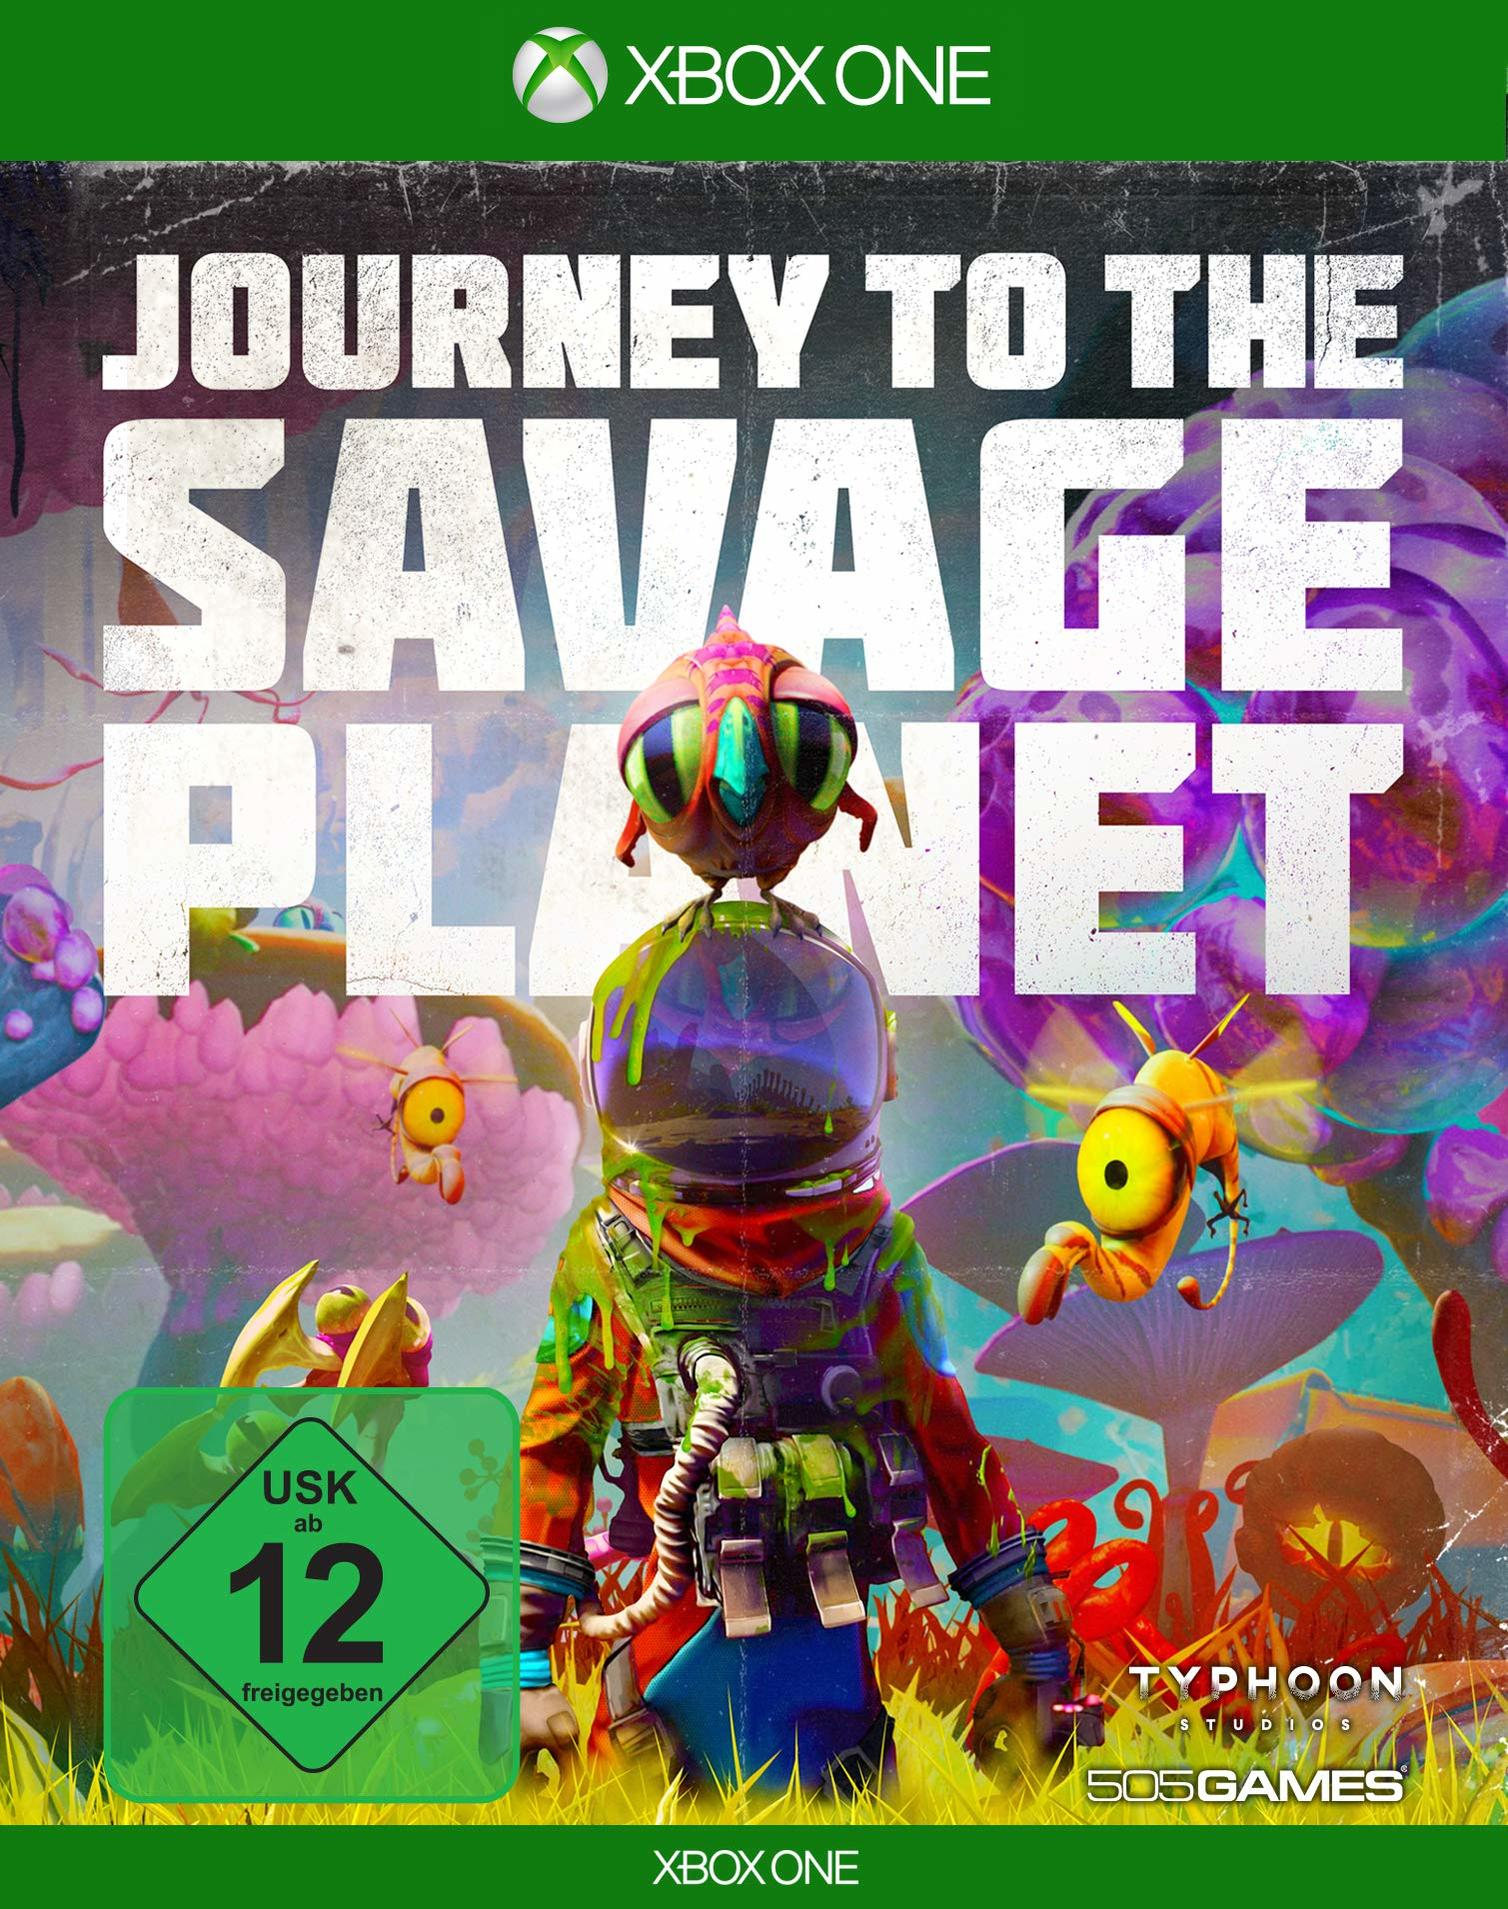 XBO JOURNEY SAVAGE One] TO PLANET - THE [Xbox